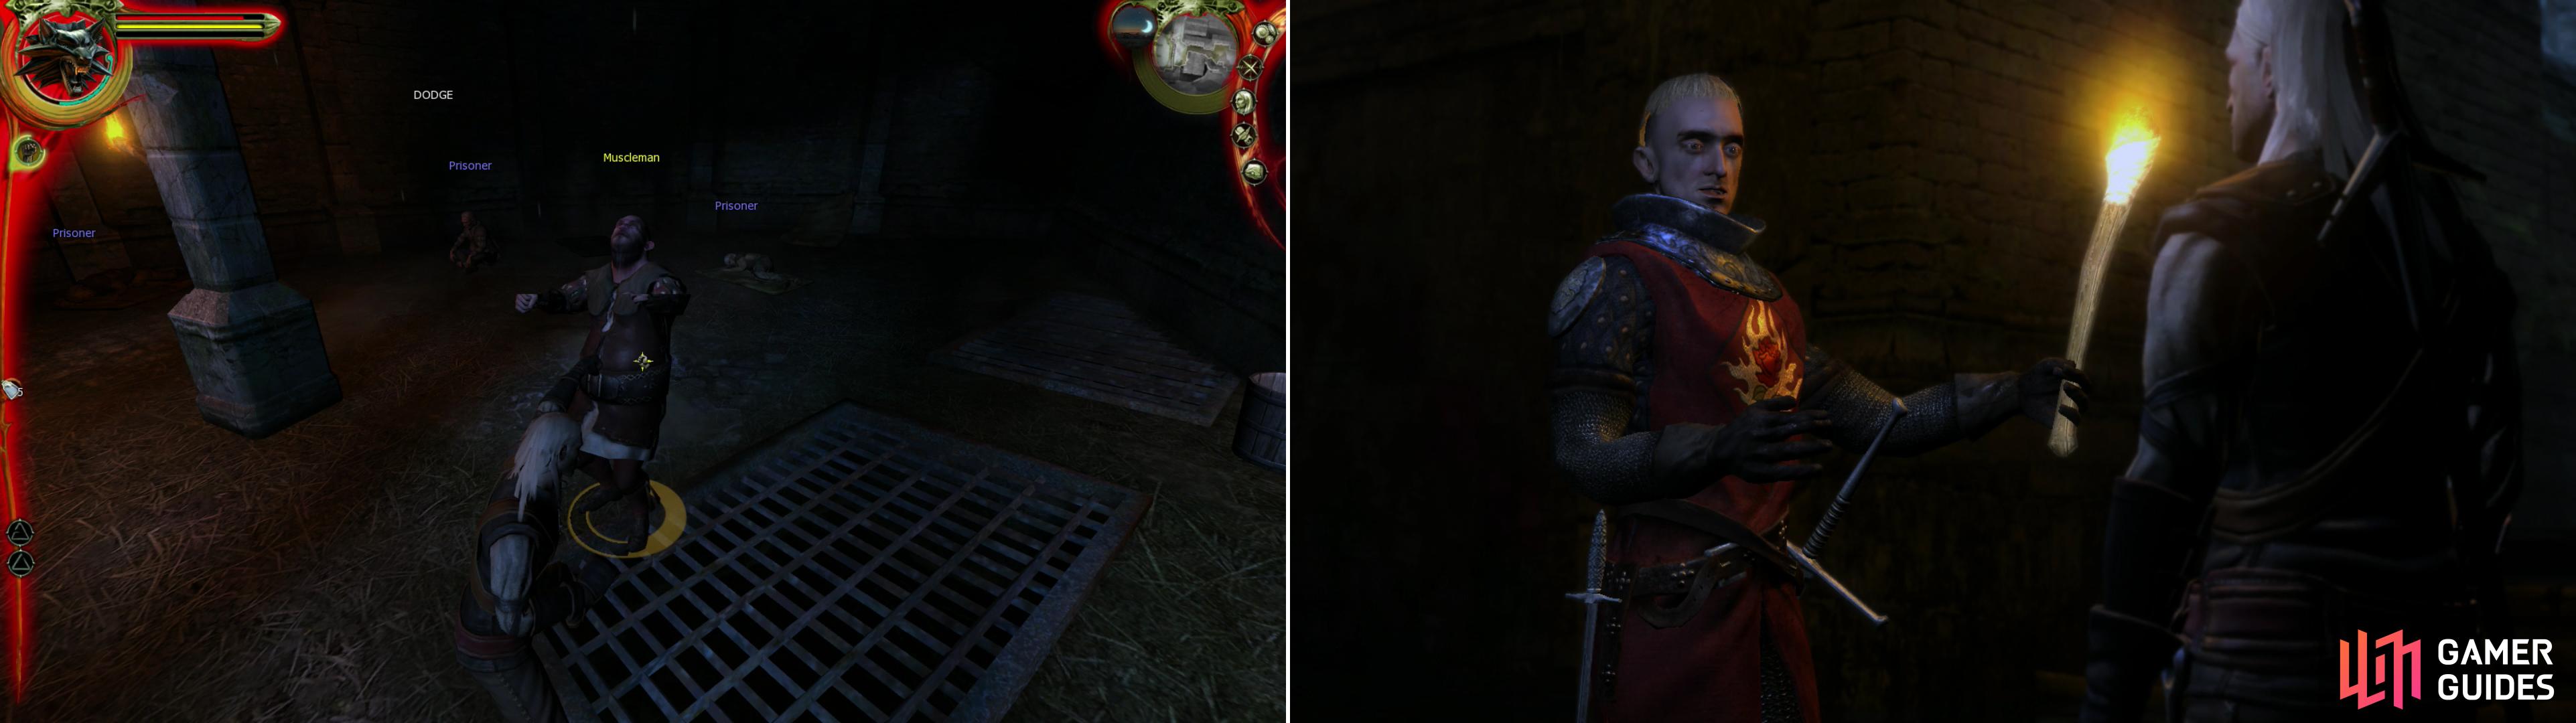 Defeat the Muscleman in fisticuffs to win the right to hunt the Cockatrice (left). In the sewers you’ll meet Siegfried, a valorous knight with noble ambitions… if a bit naïve (right).